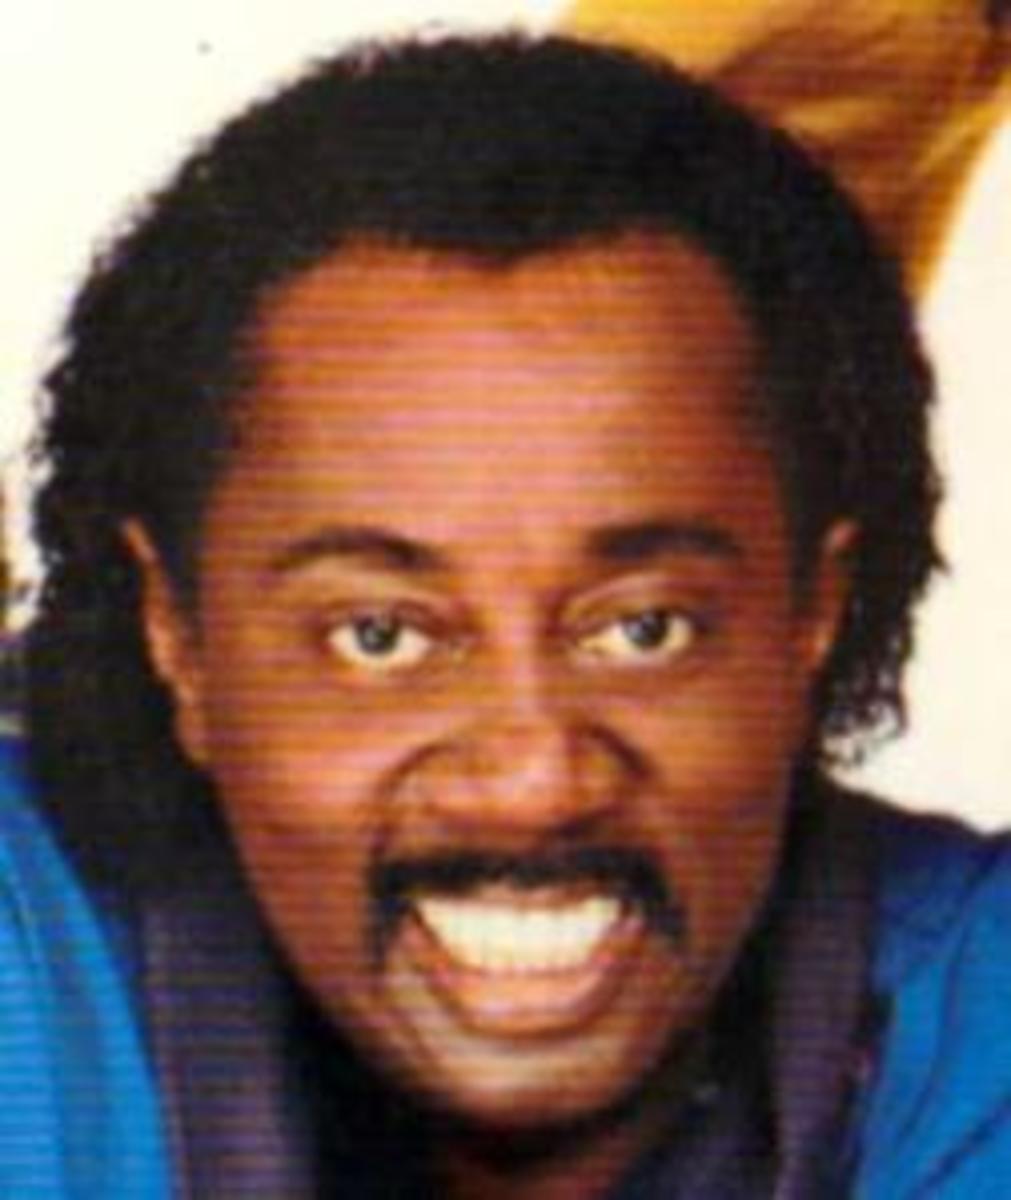 Known for his distinct bass voice, Melvin Franklin was a co-founder of the Temptations and helped craft the group's trademark sound.